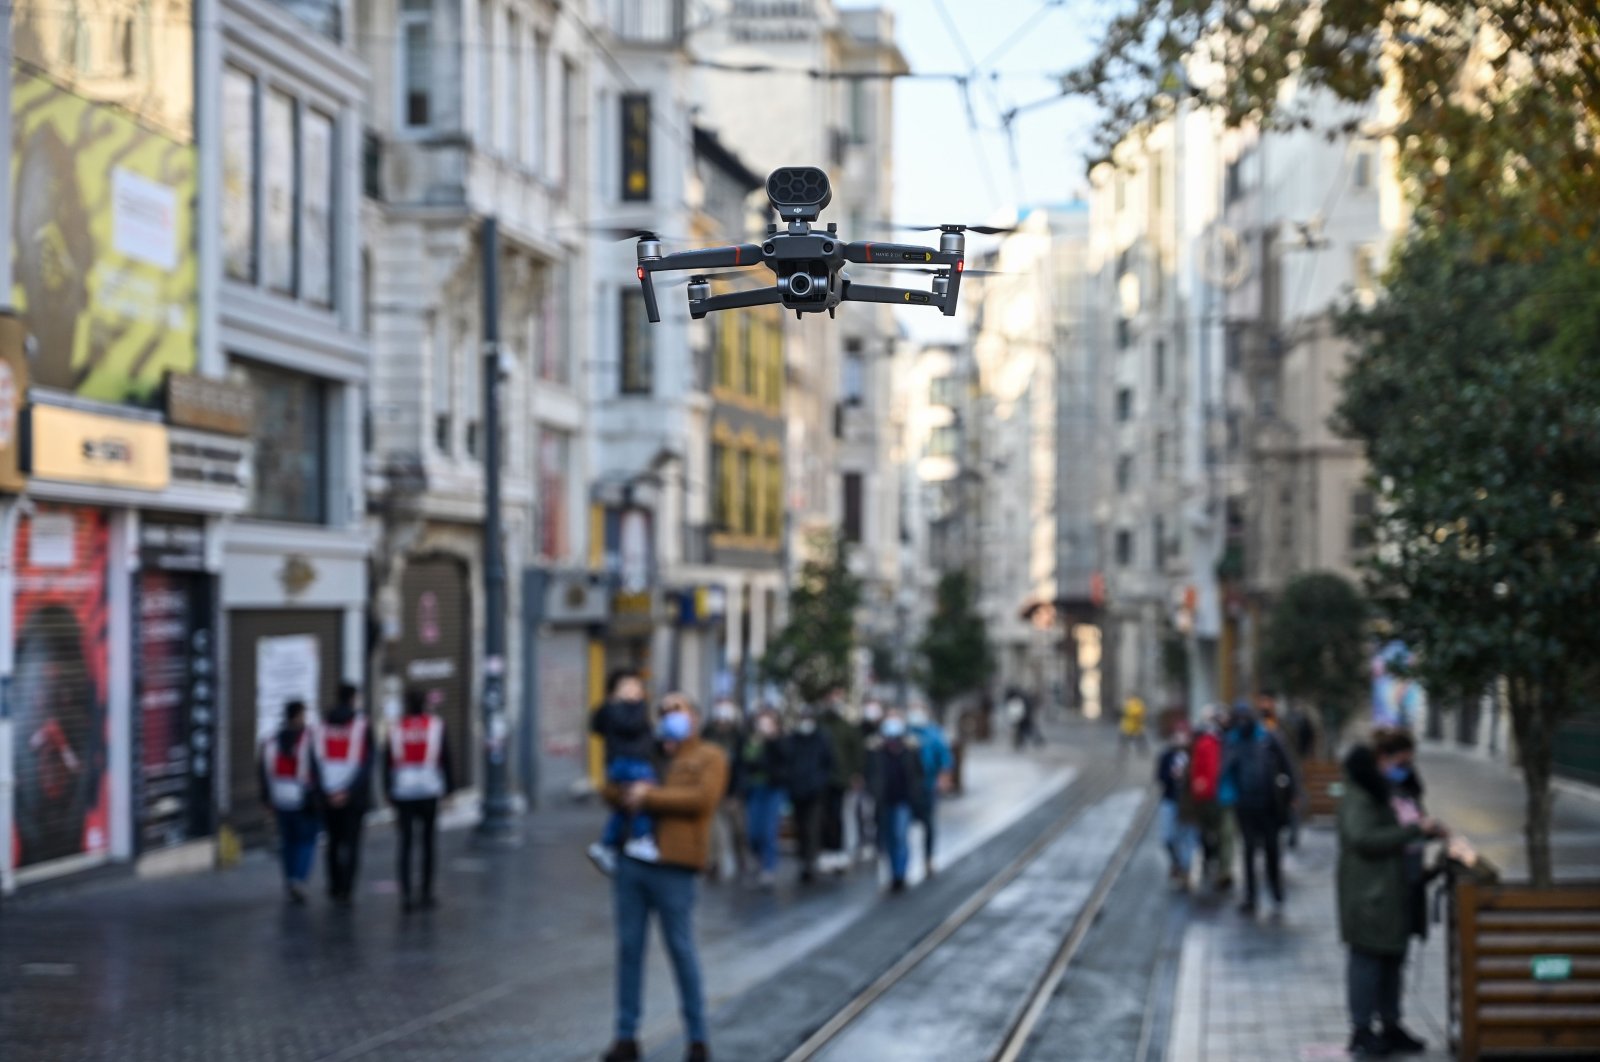 A Turkish police drone announces social distancing rules in English via a speaker as people walk on Istiklal avenue during a weekend curfew aimed at curbing the spread of the COVID-19 pandemic, Istanbul, Dec. 5, 2020. (AFP Photo)